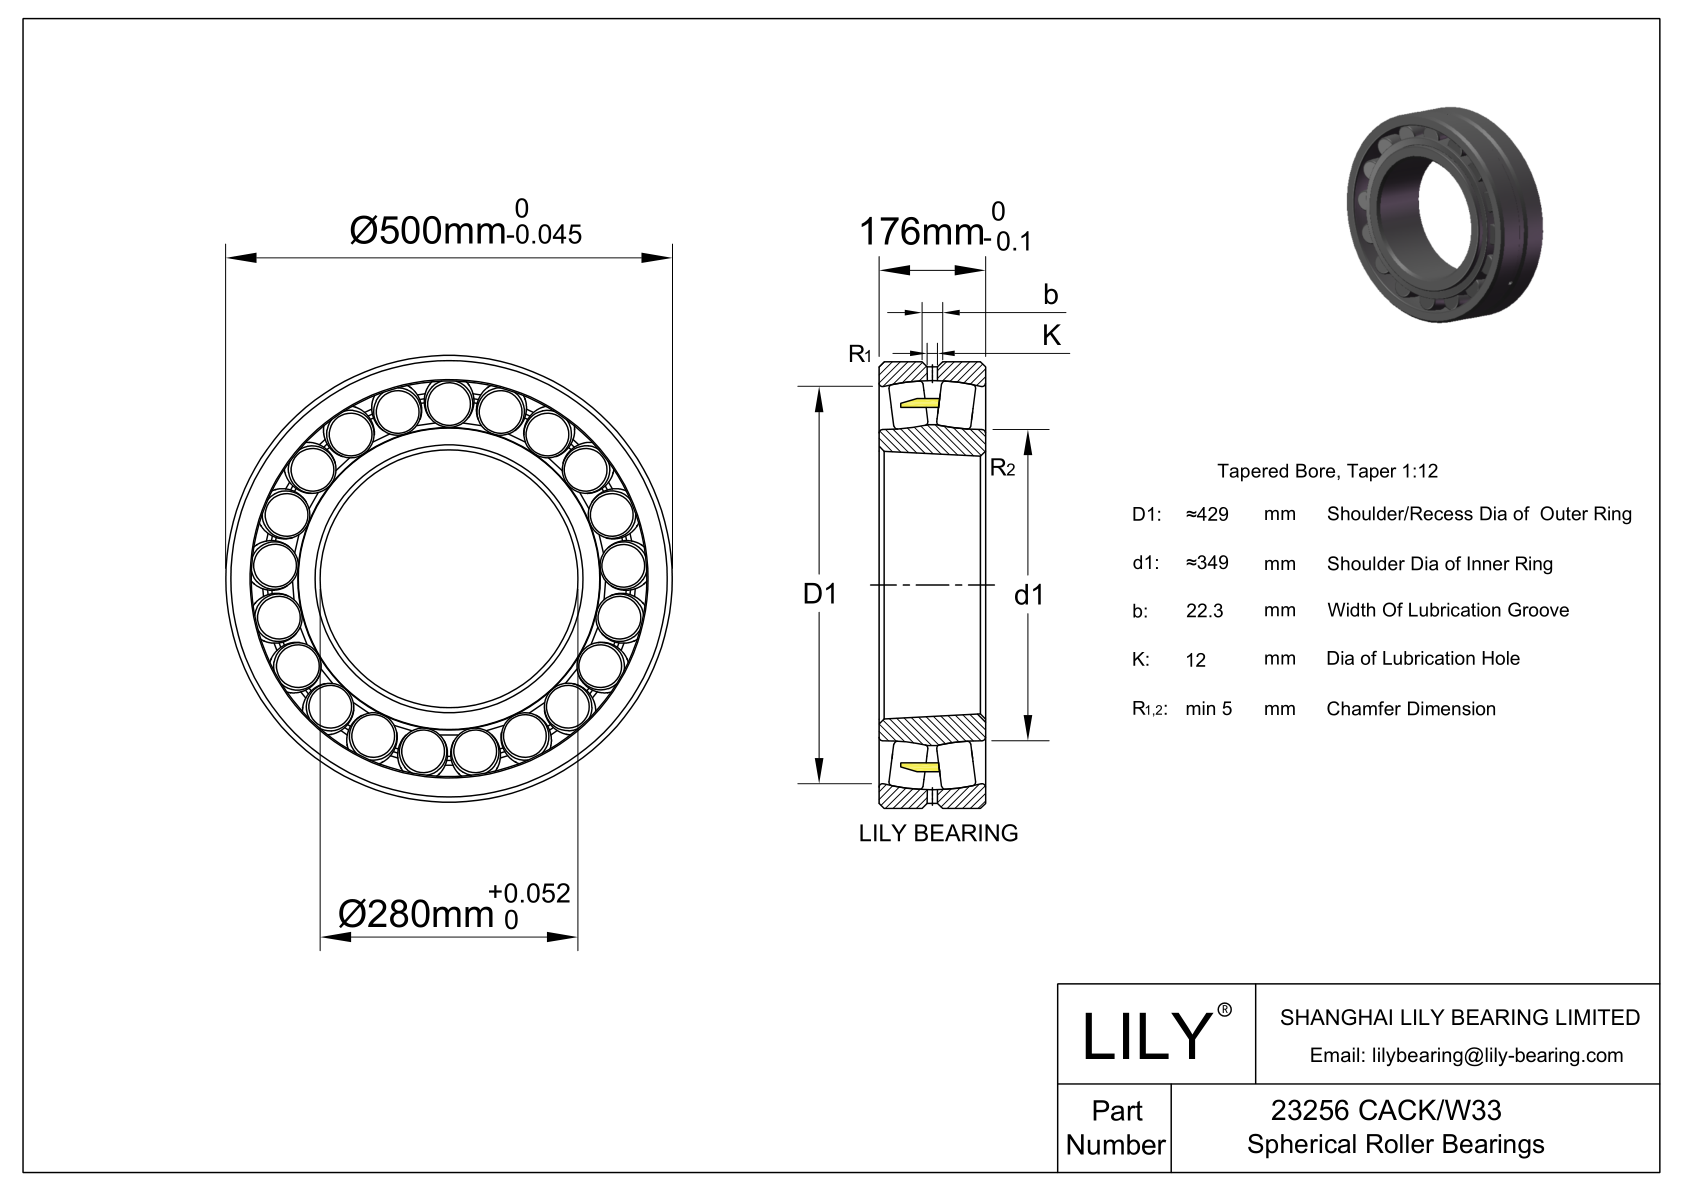 23256 CACK/W33 Double Row Spherical Roller Bearing cad drawing